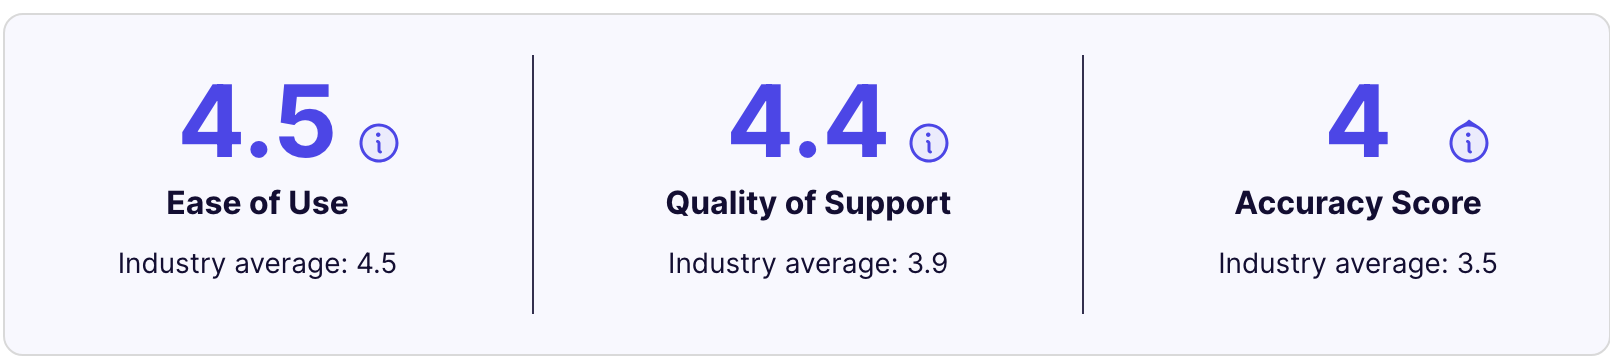 Onfido Industry average